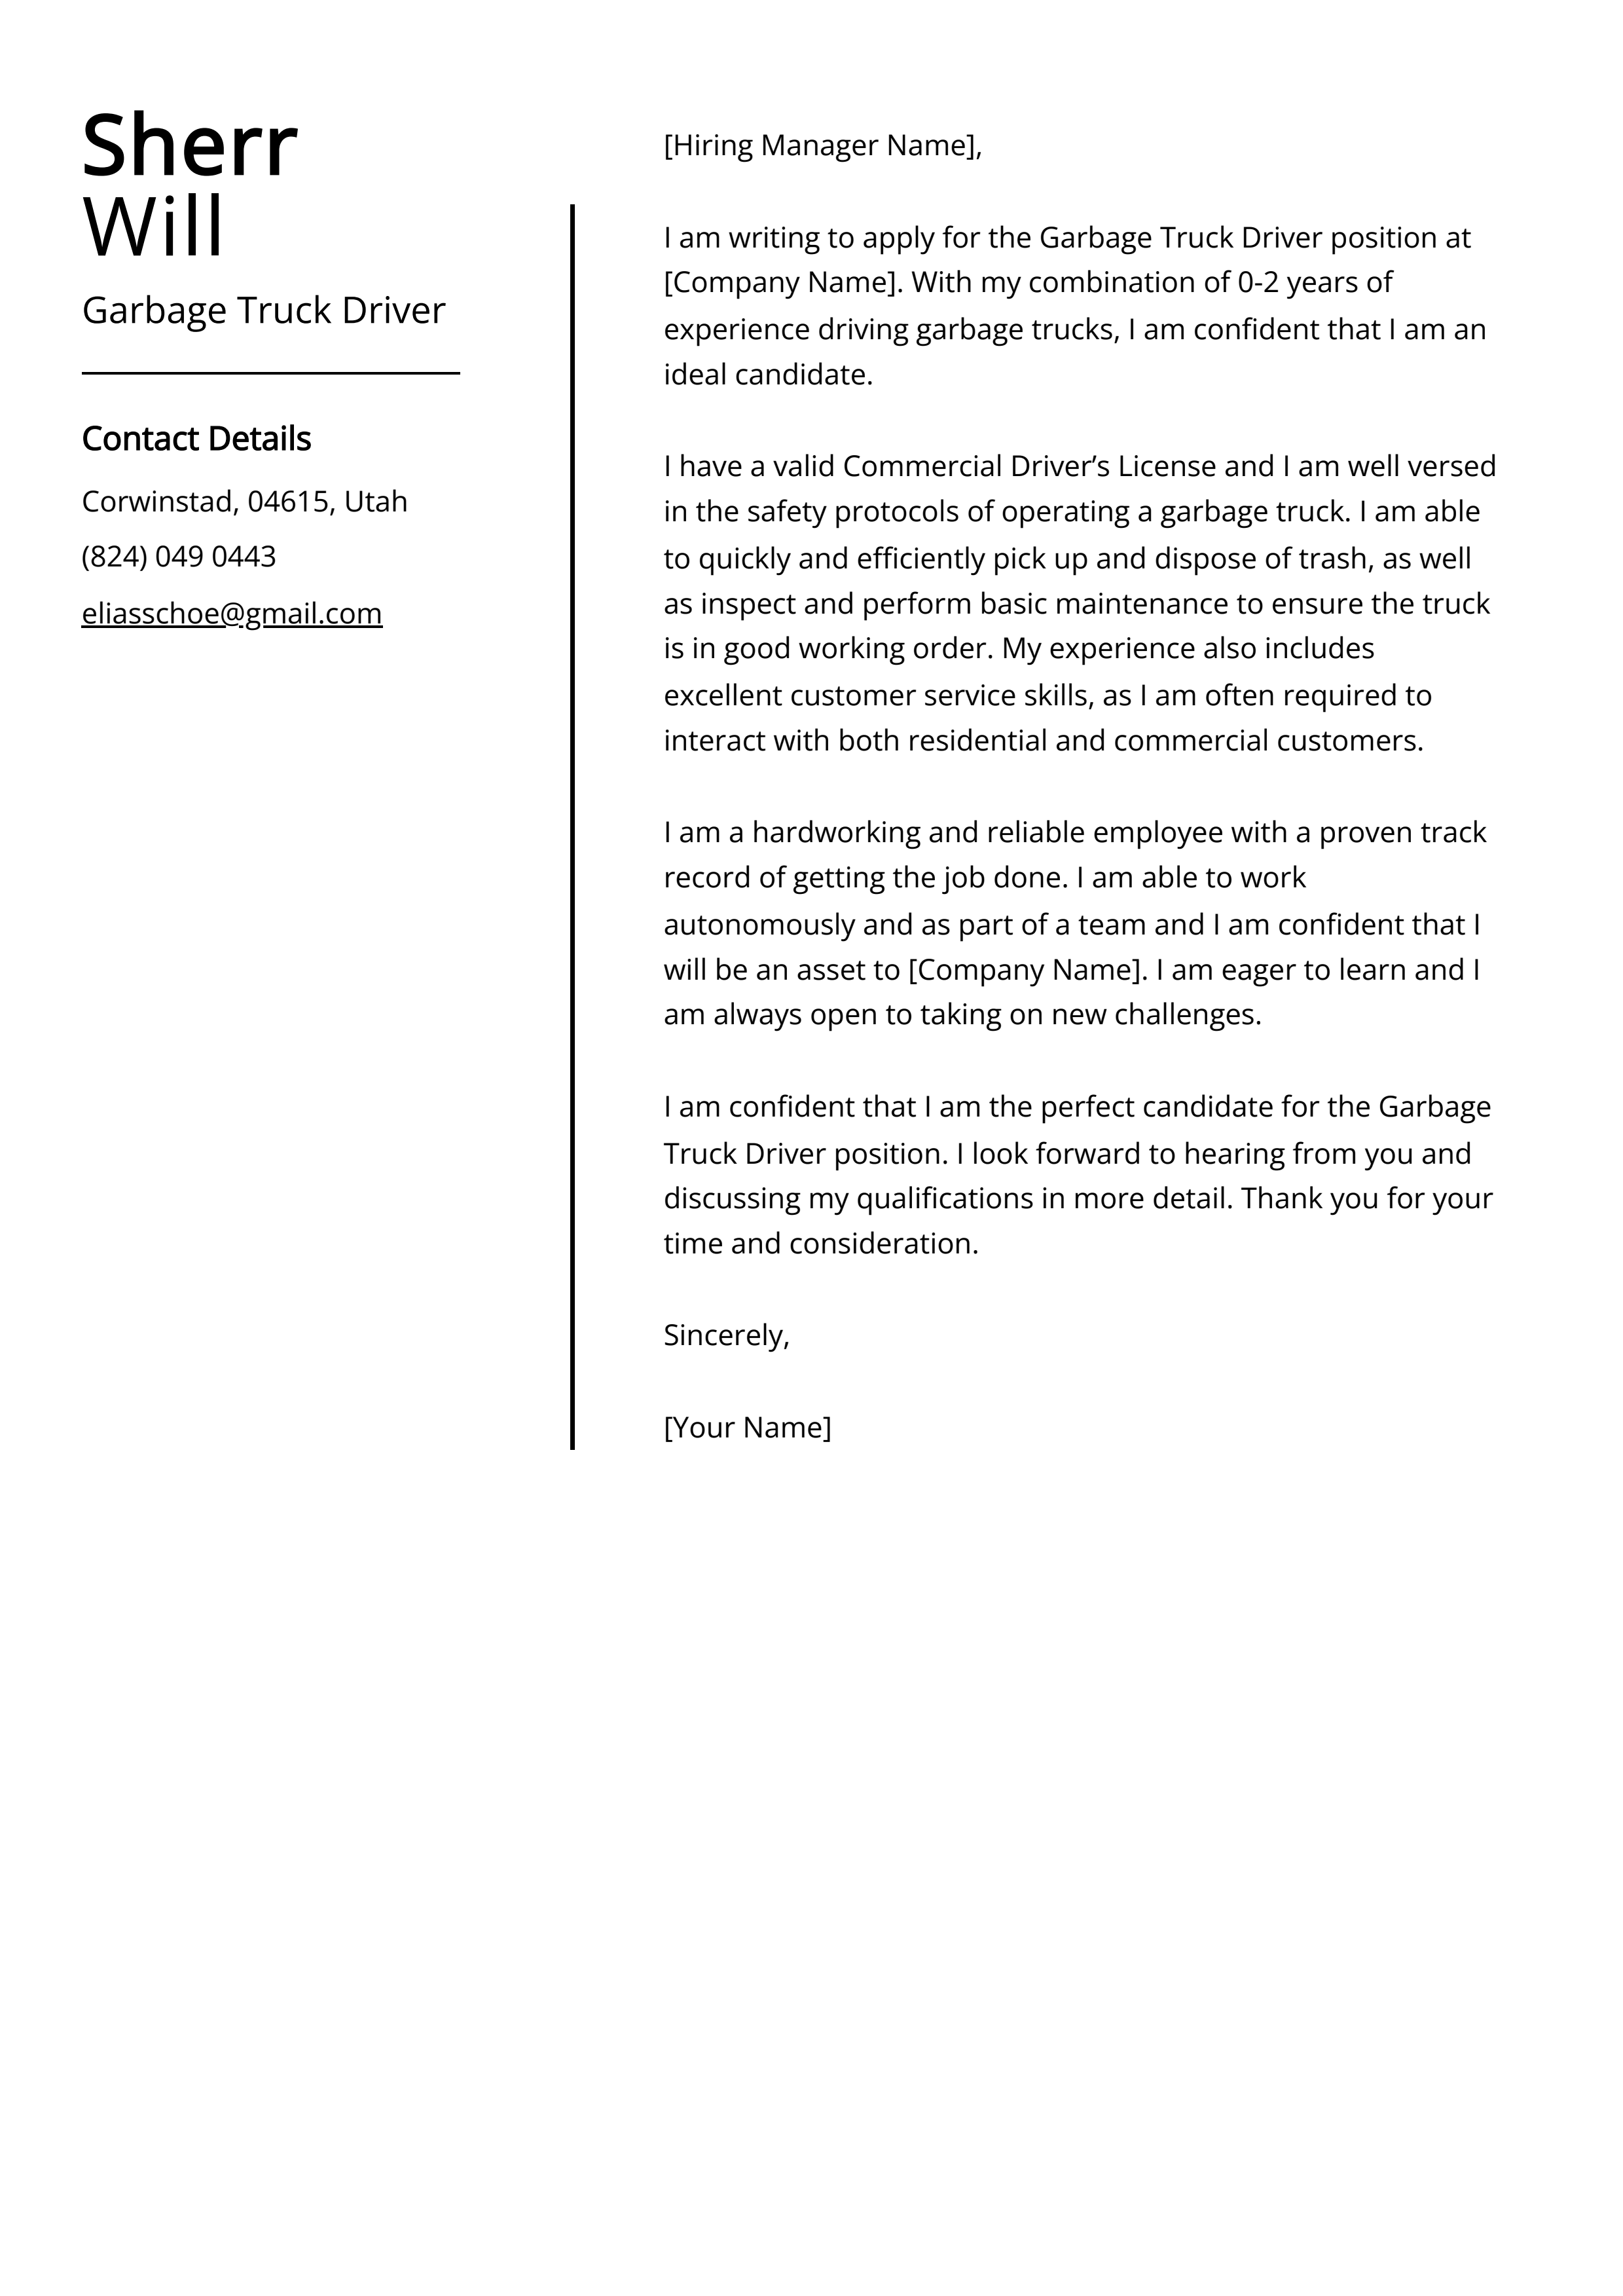 Garbage Truck Driver Cover Letter Example